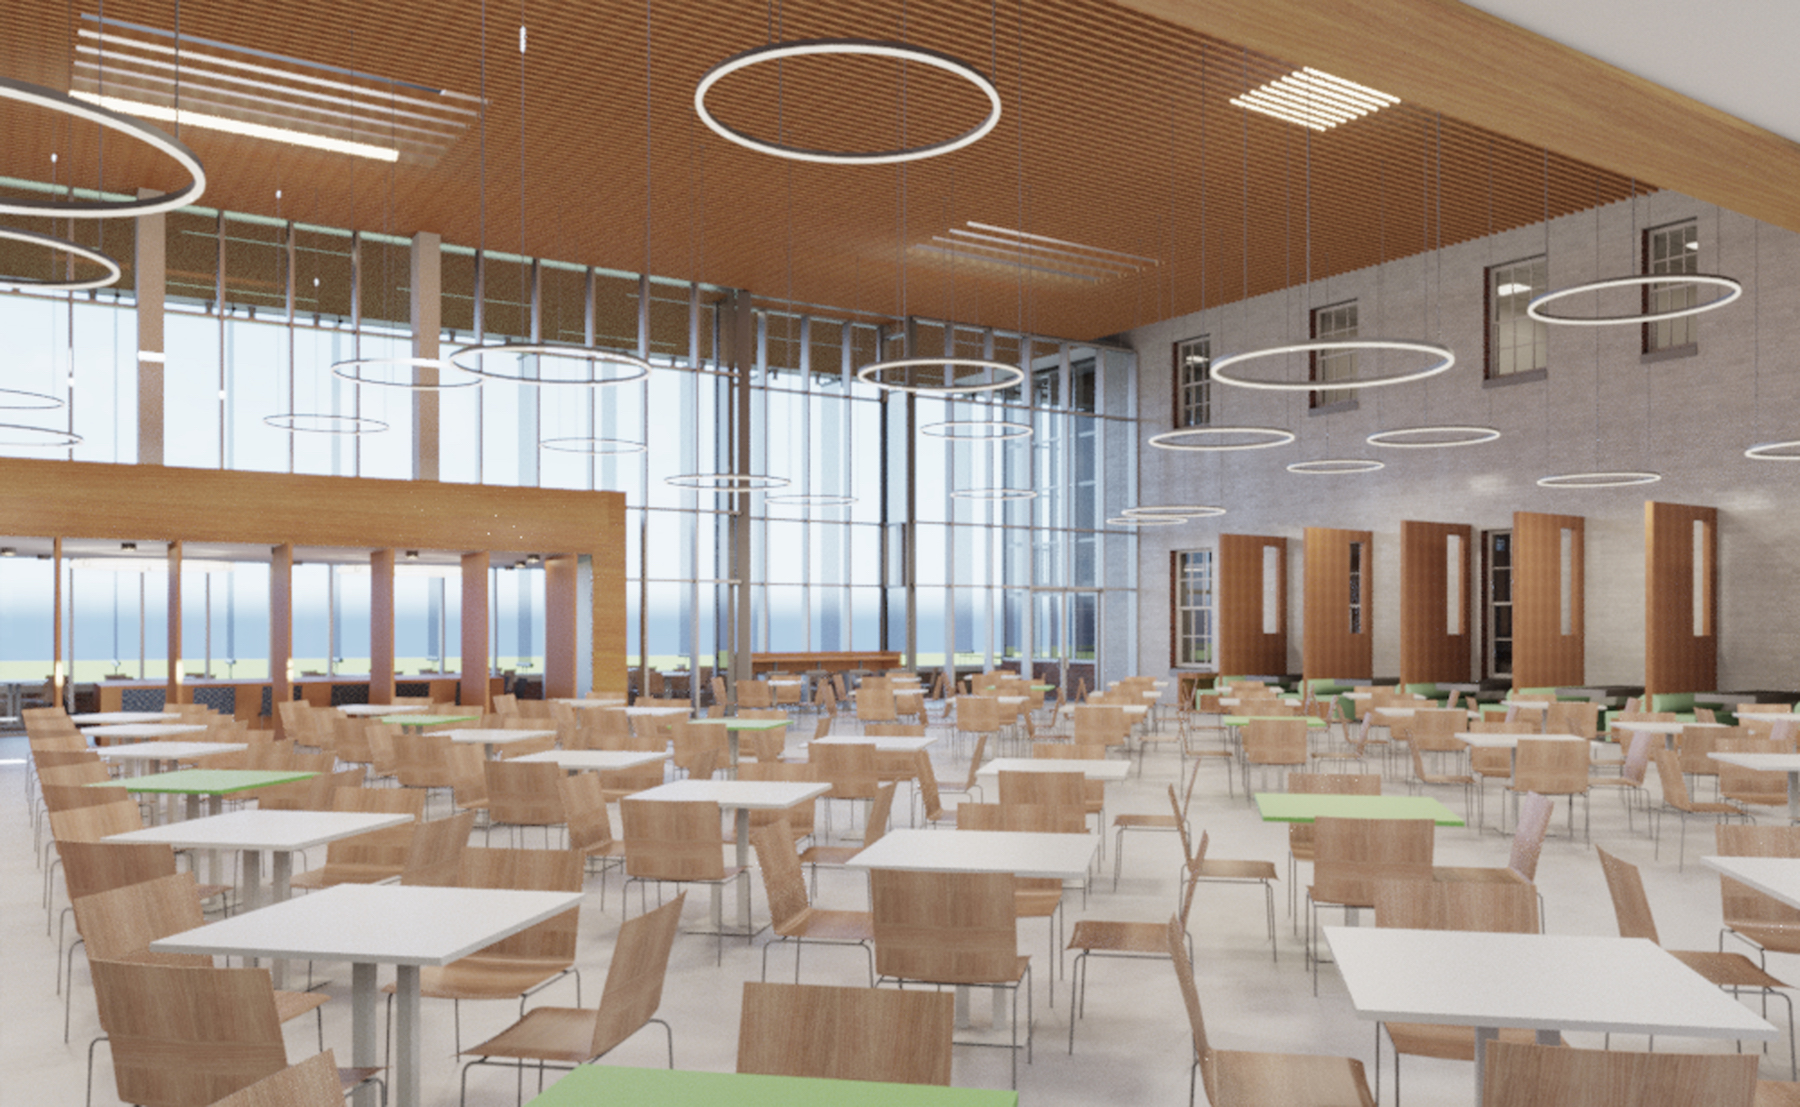 Rendering of renovated Commons Dining Hall